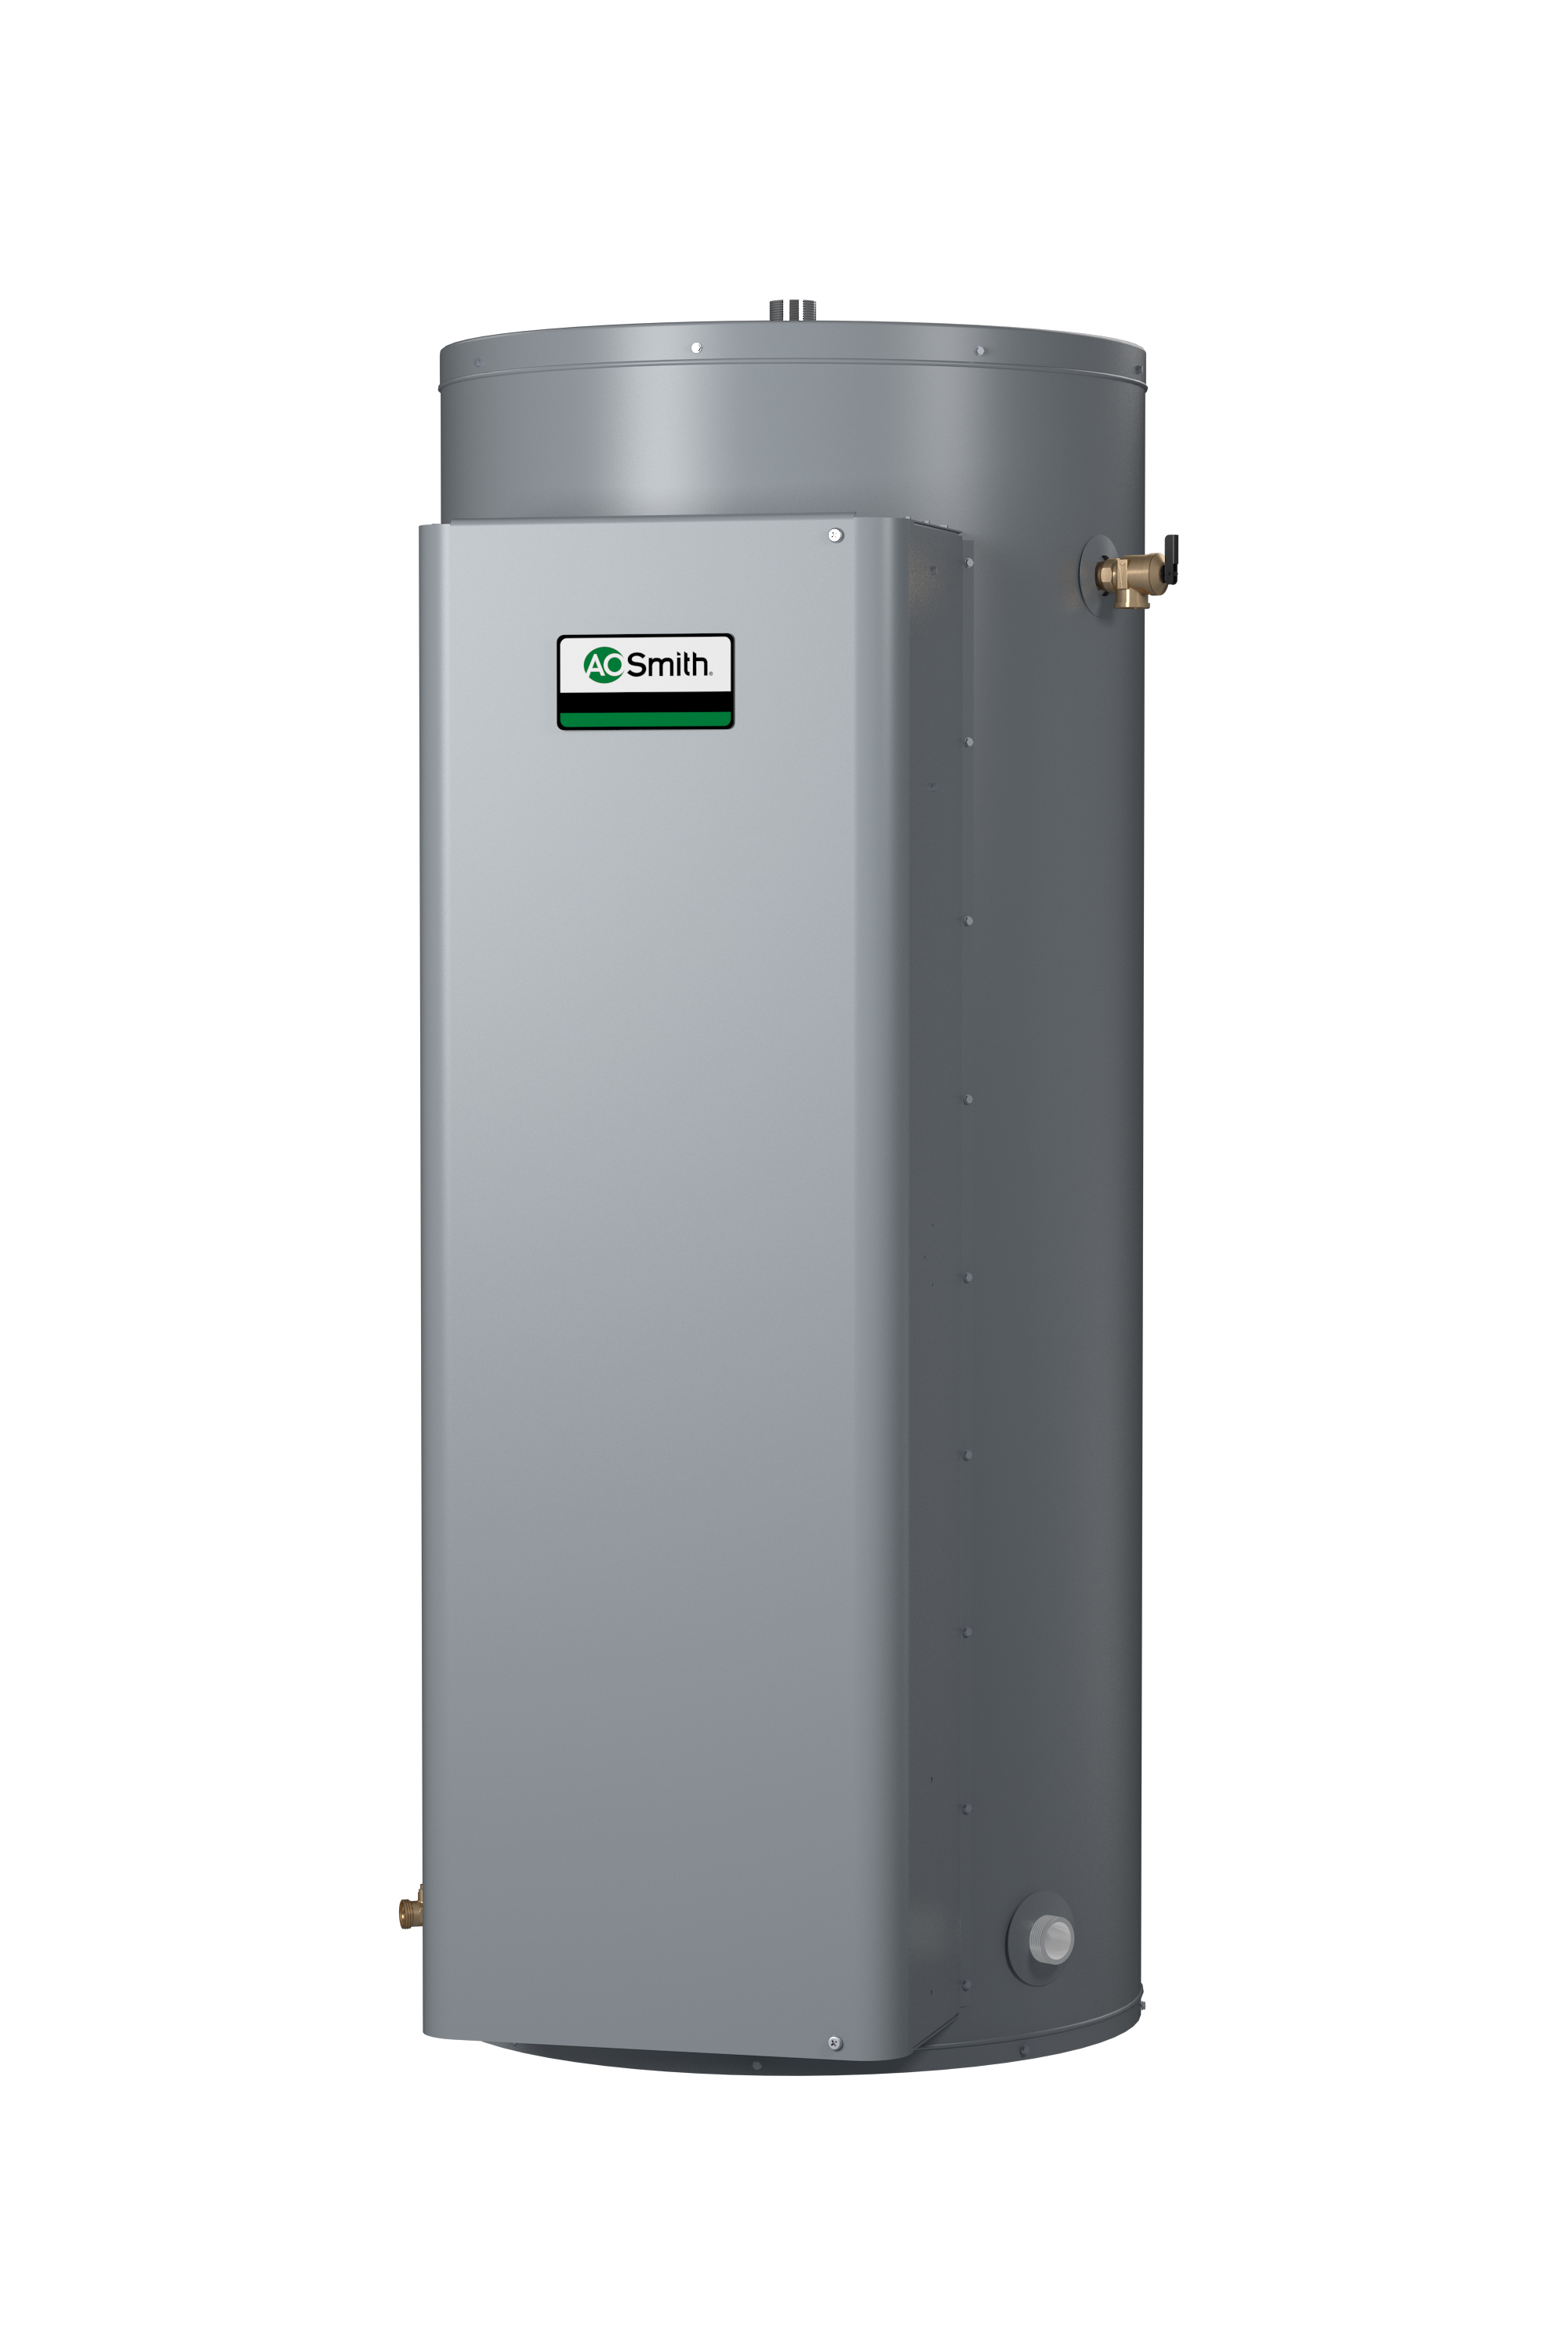 AO SMITH DVE-120A-12, 119 GALLONS, 12.3KW, 208 VOLT, 33.3 AMPS, 3 PHASE, 3 ELEMENT, ASME GOLD Xi SERIES HEAVY DUTY COMMERCIAL ELECTRIC WATER HEATER